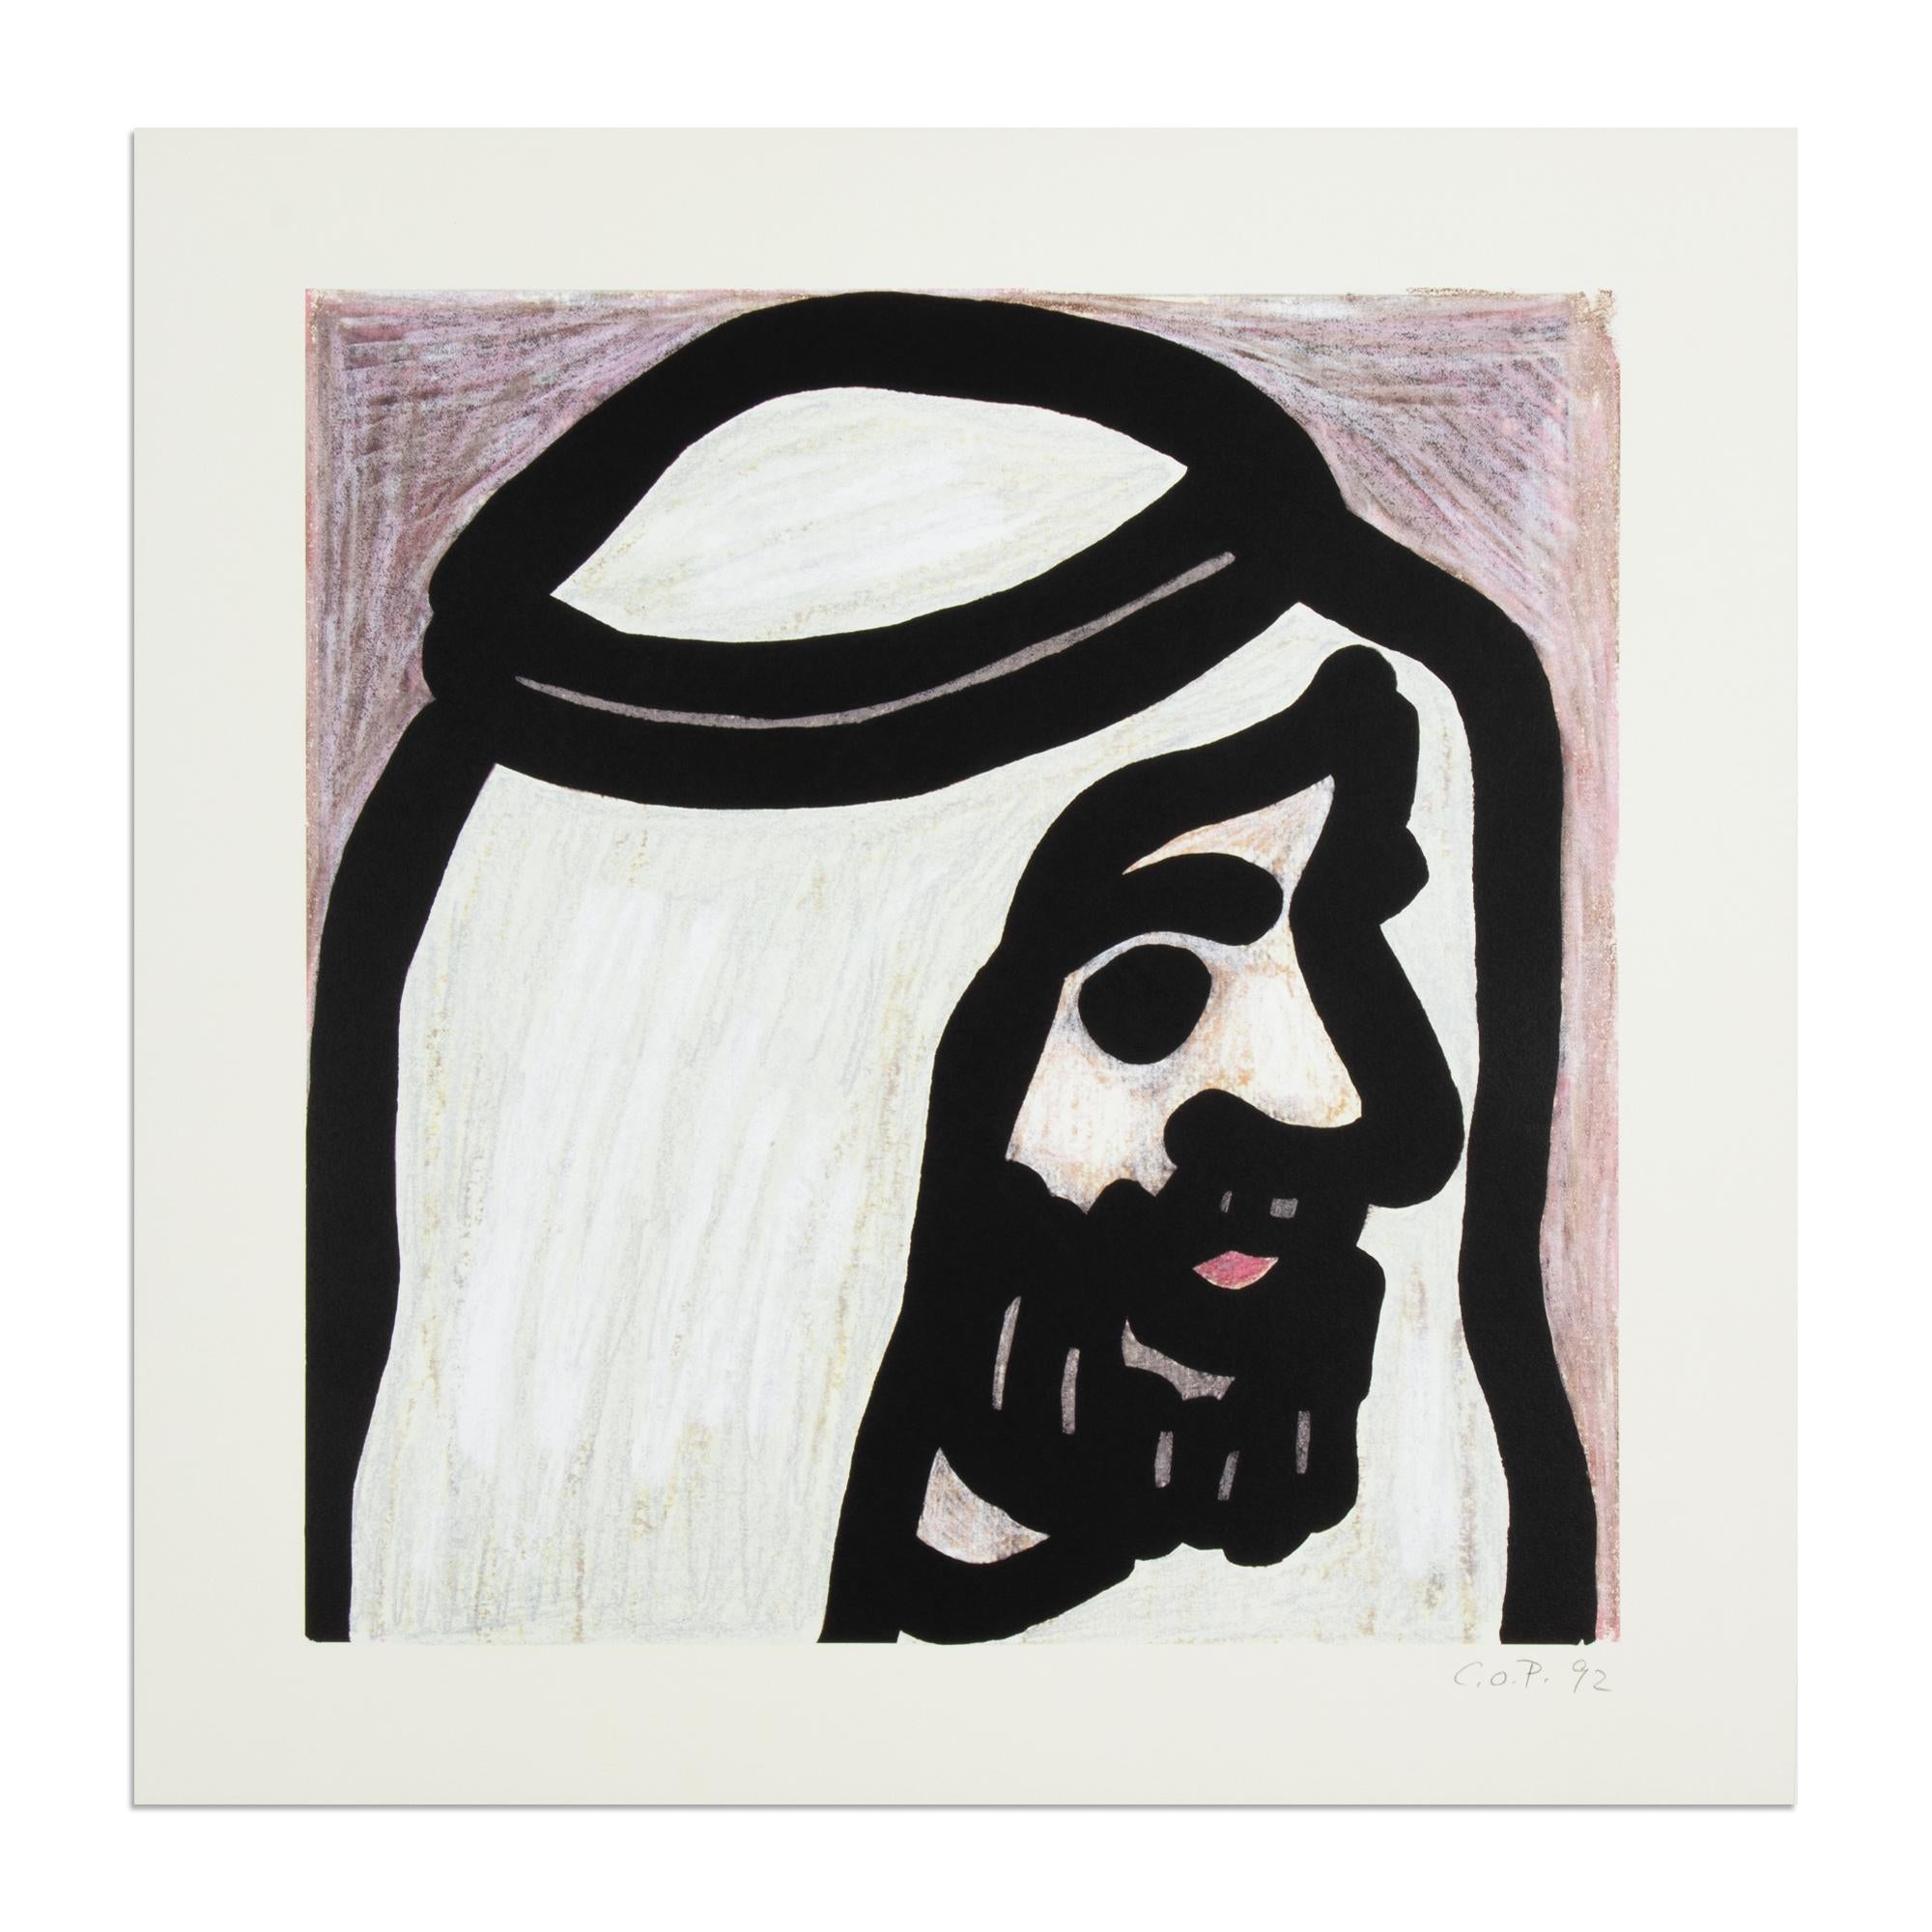 C.O. Paeffgen (German, 1933-2019)
Sheikh, 1992
Medium: Offset lithograph on card stock
Dimensions: 49.5 x 50 cm
Edition of 100: Monogrammed, numbered and dated
Condition: Very good